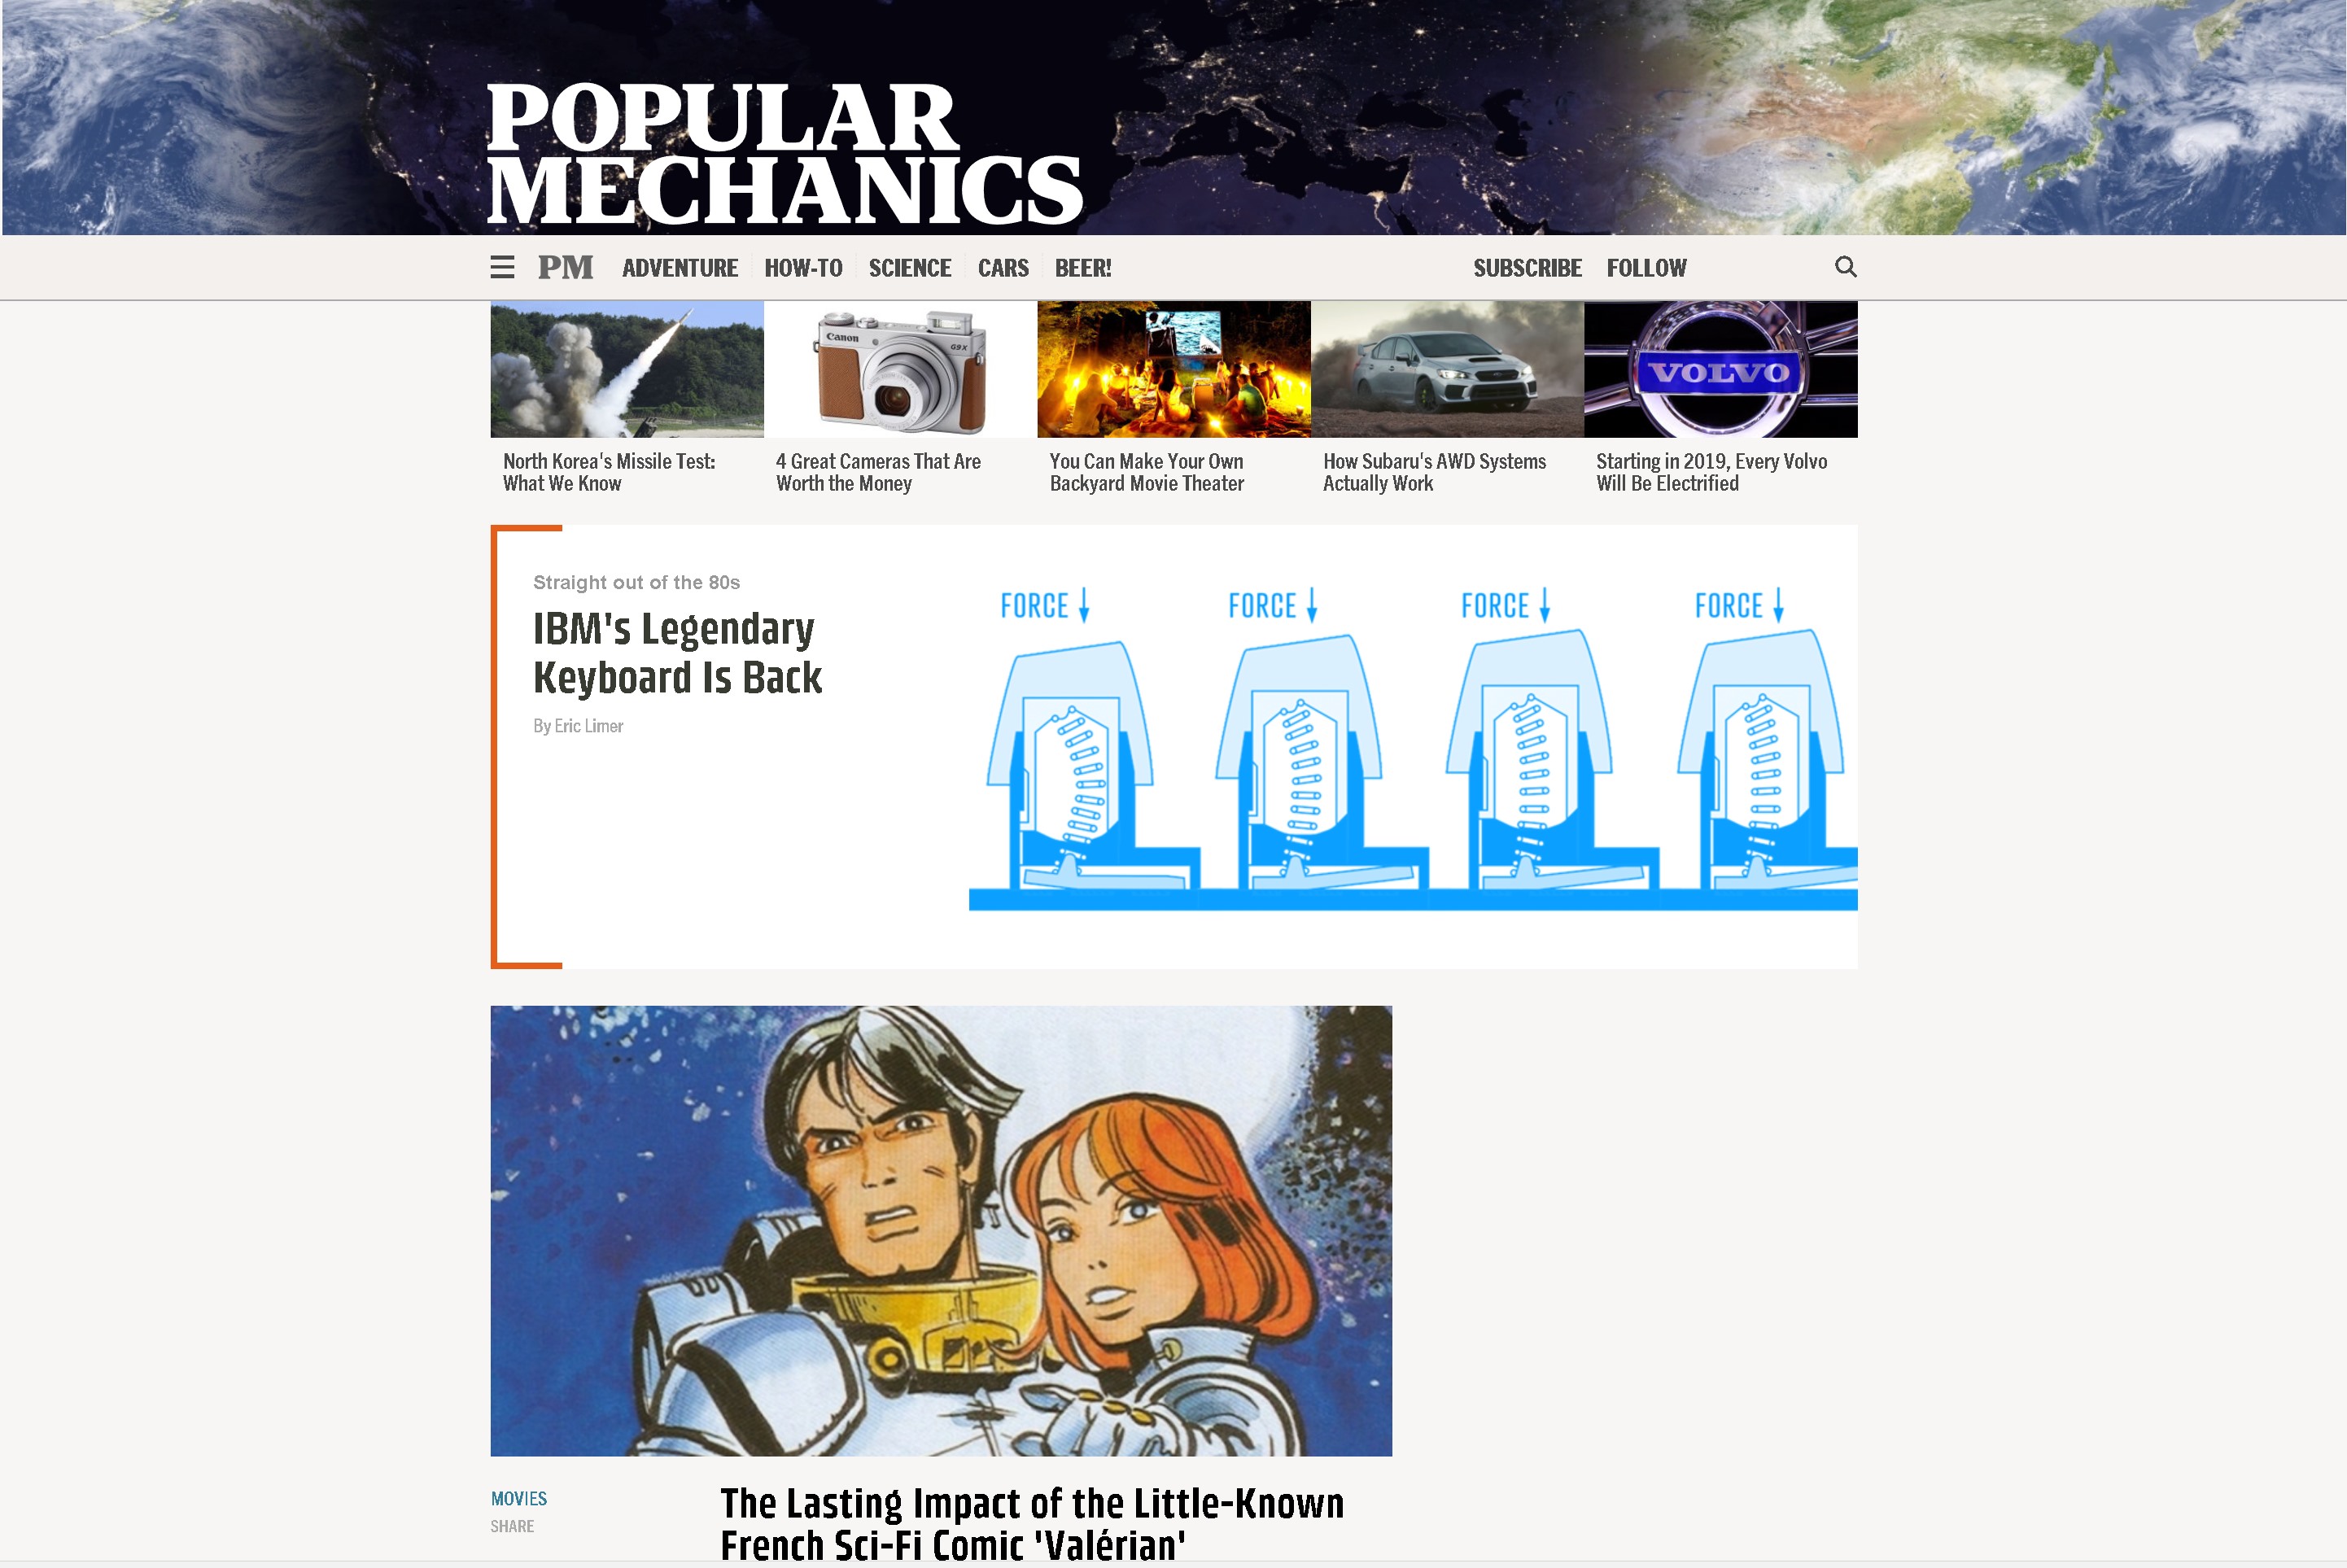 popular mechanics home page with Model F article.jpg